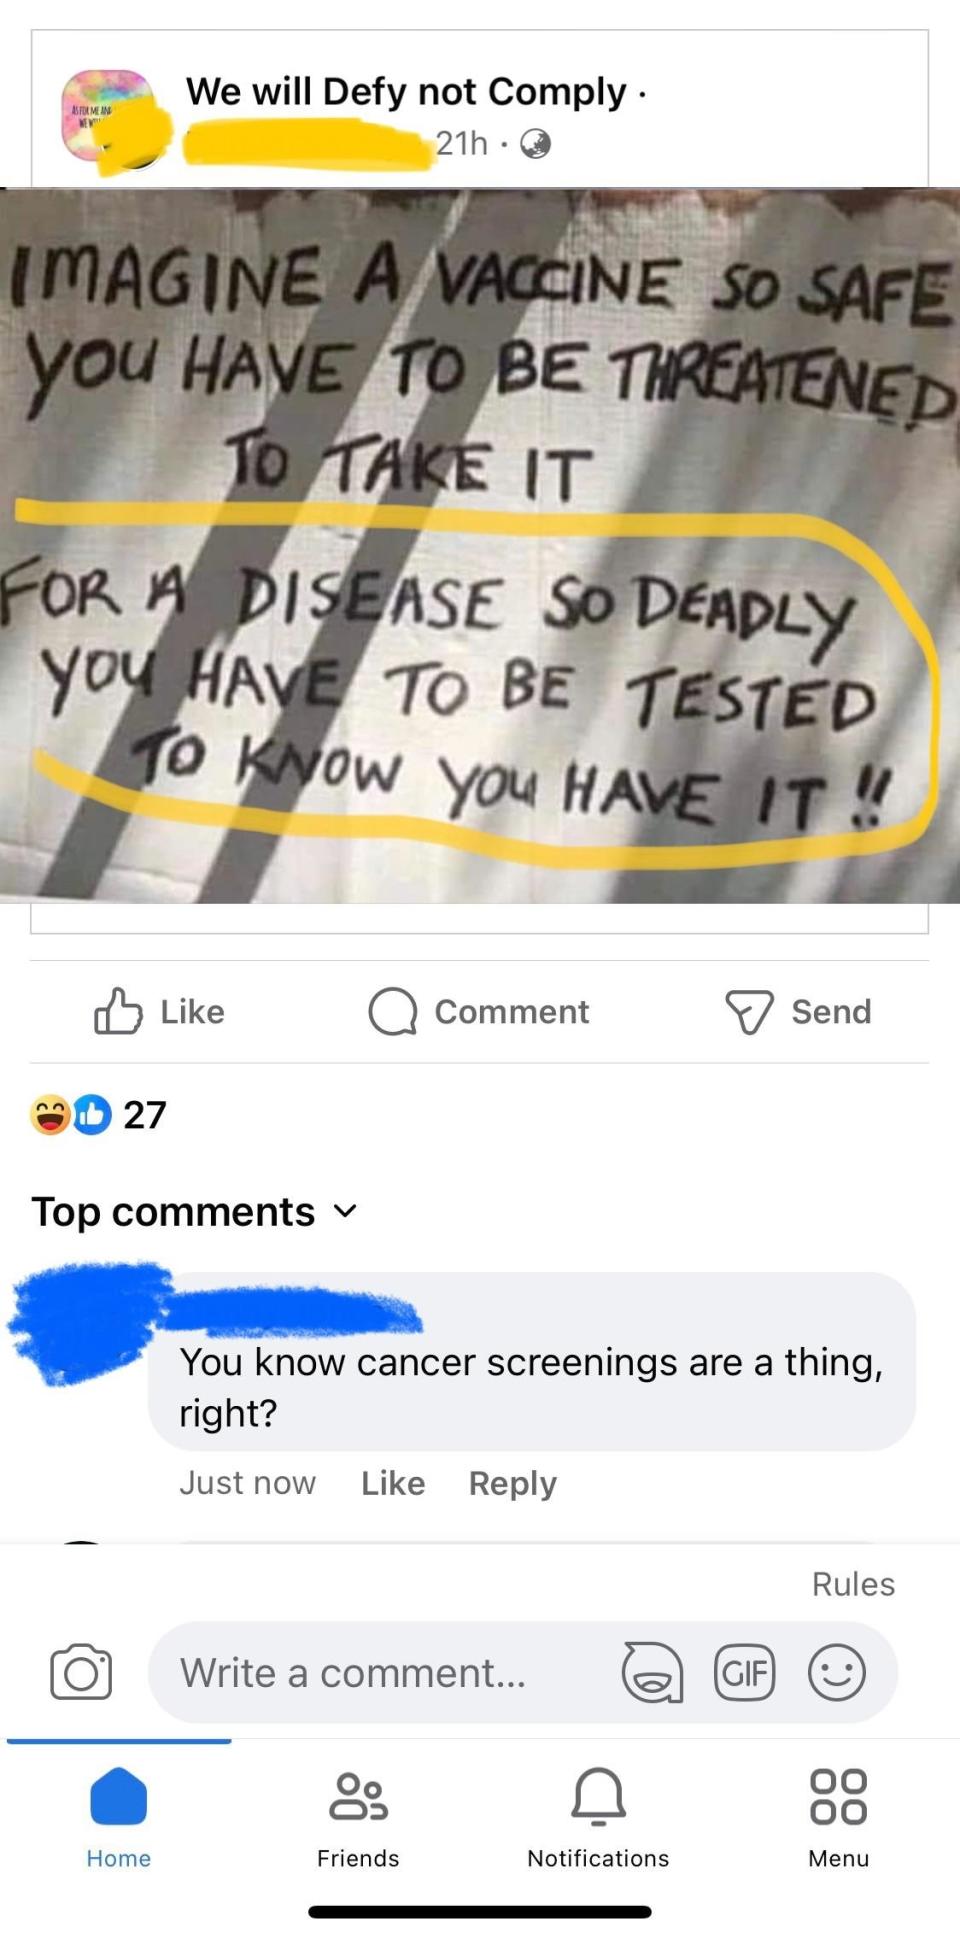 "You know cancer screenings are a thing, right?"